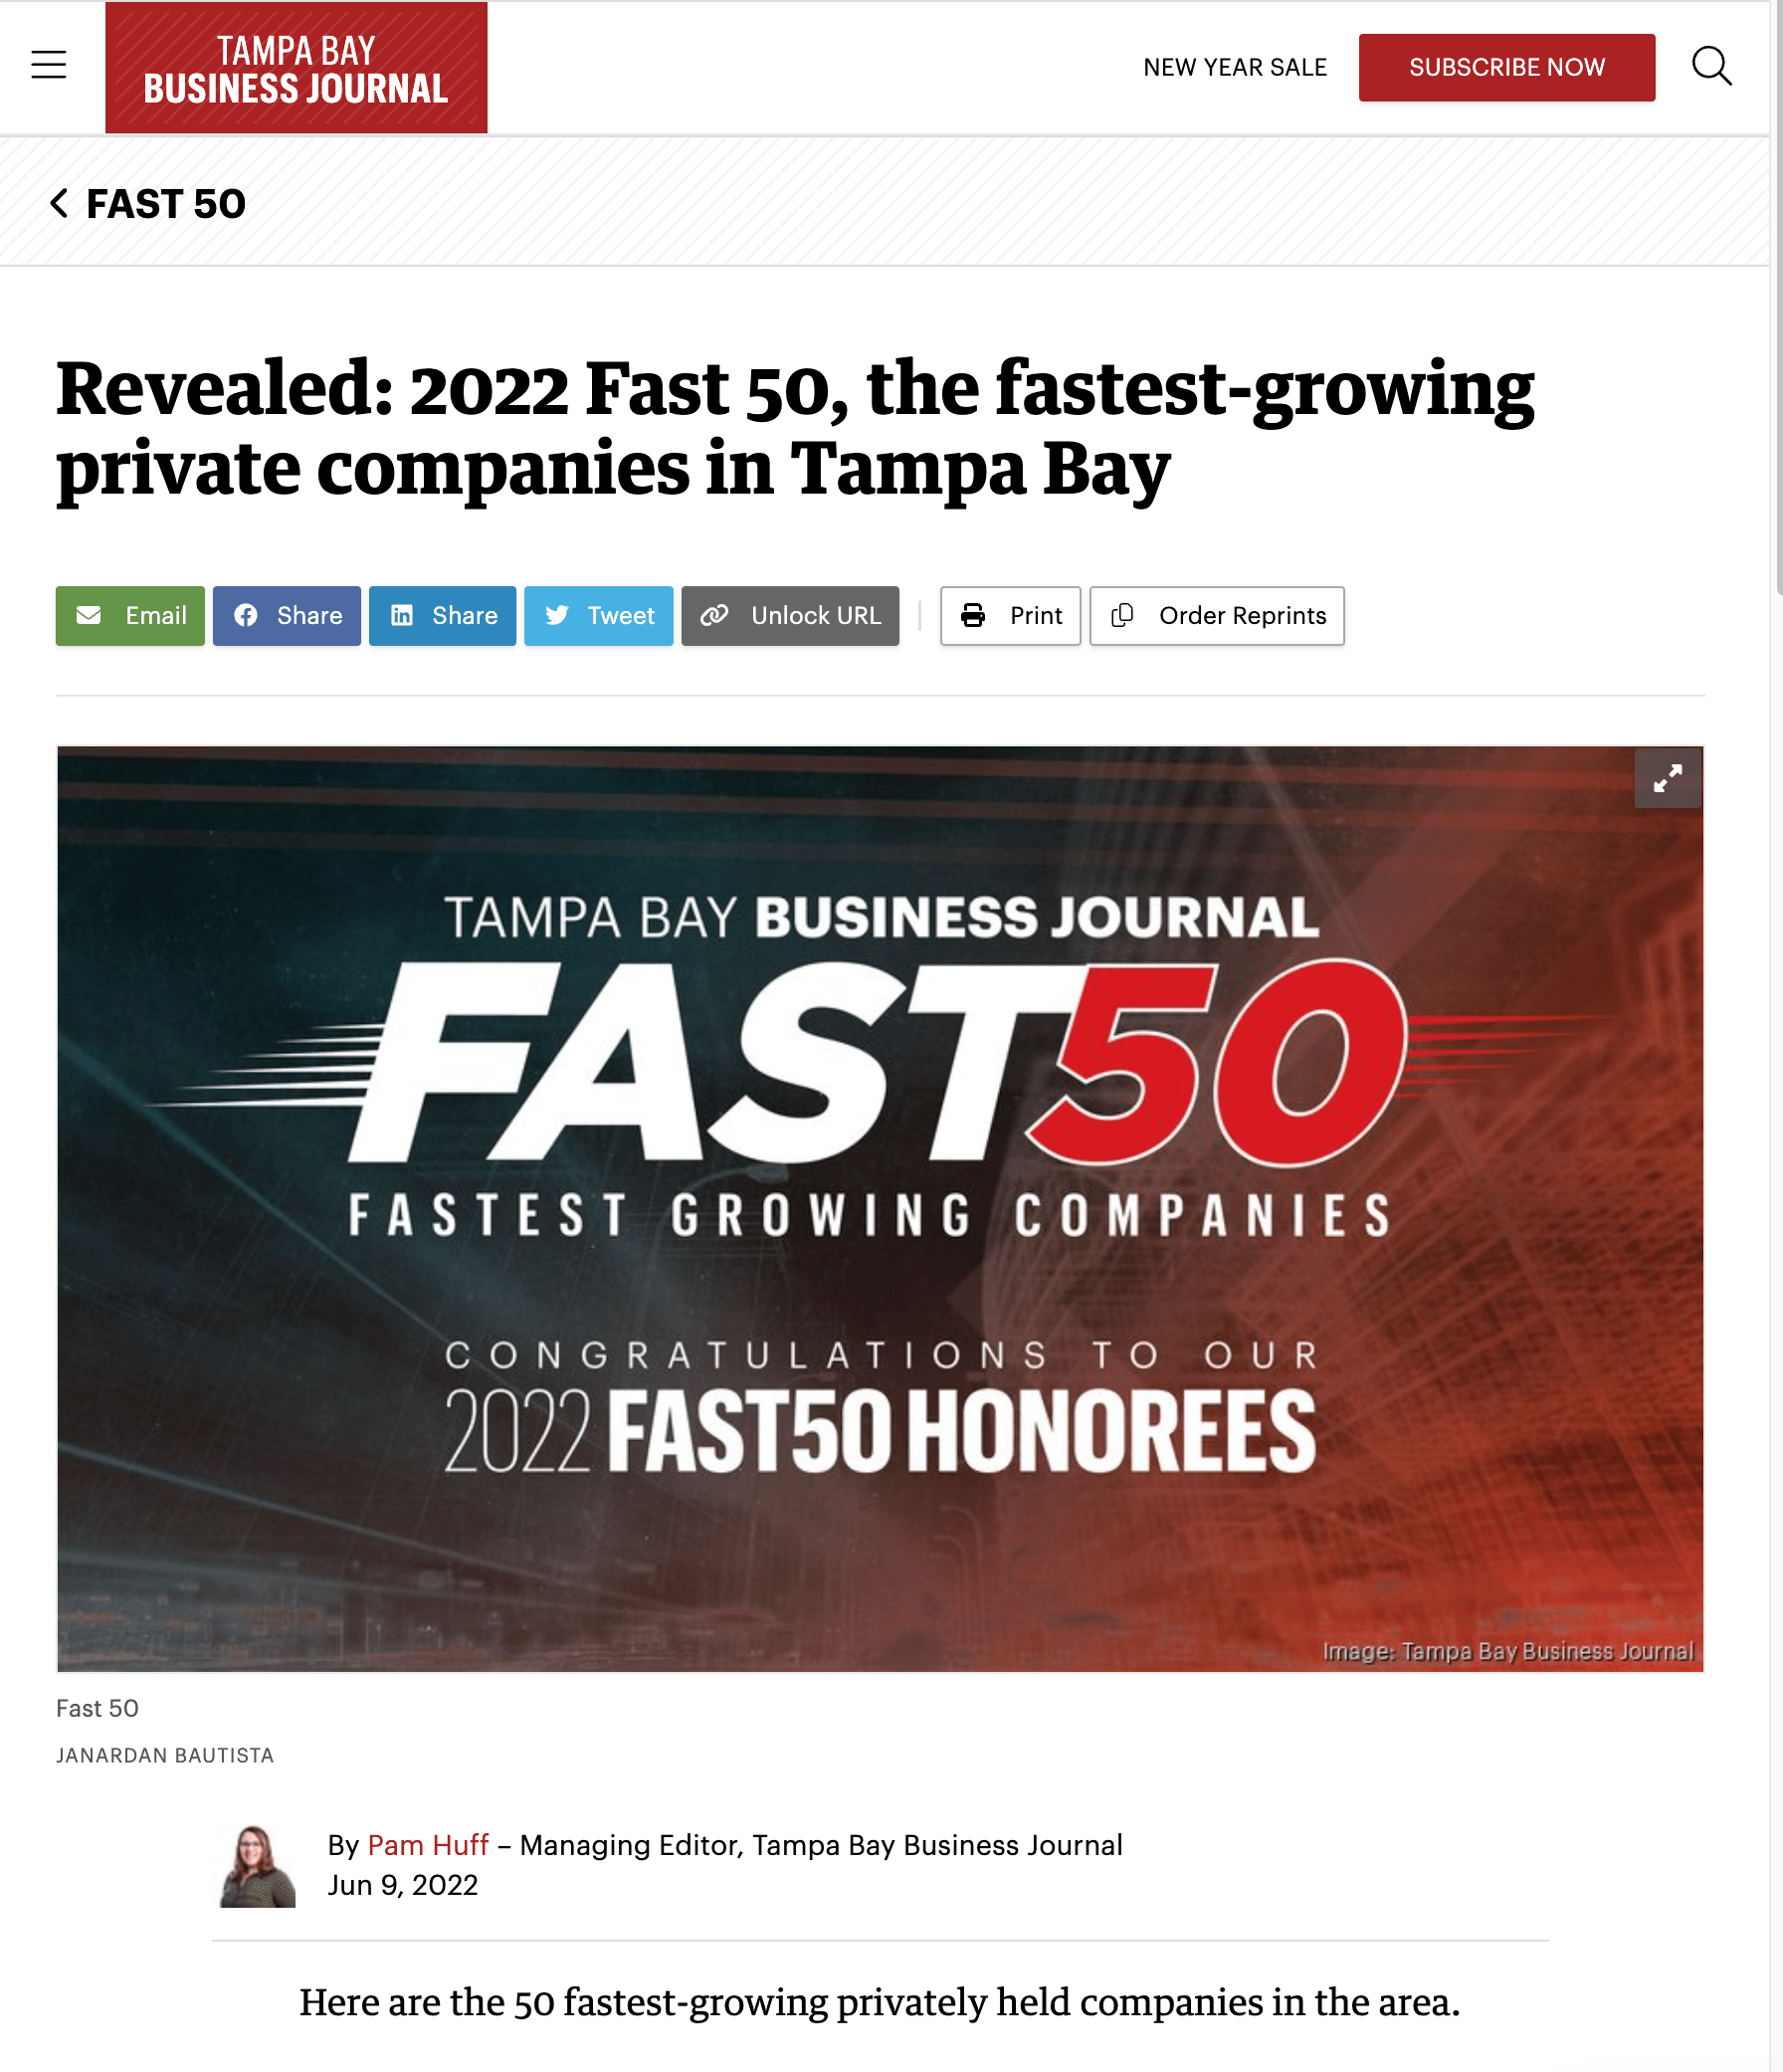 Revealed: 2022 Fast 50, the fastest-growing private companies in Tampa Bay